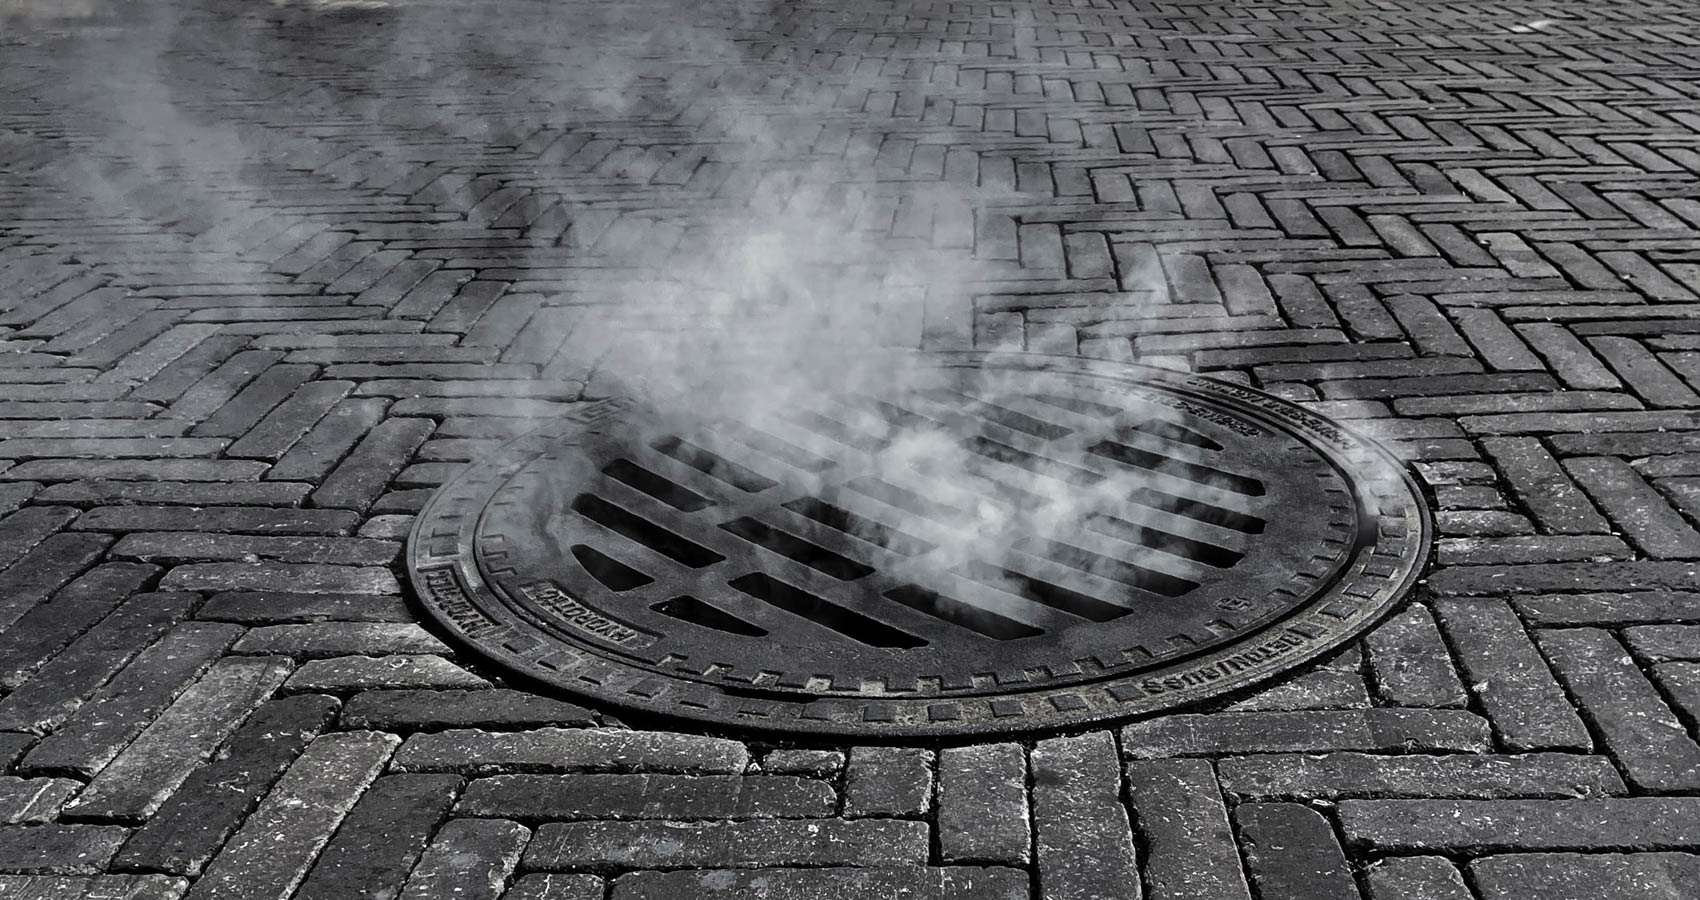 On Sewers, poetry by Warren Alexander at Spillwords.com